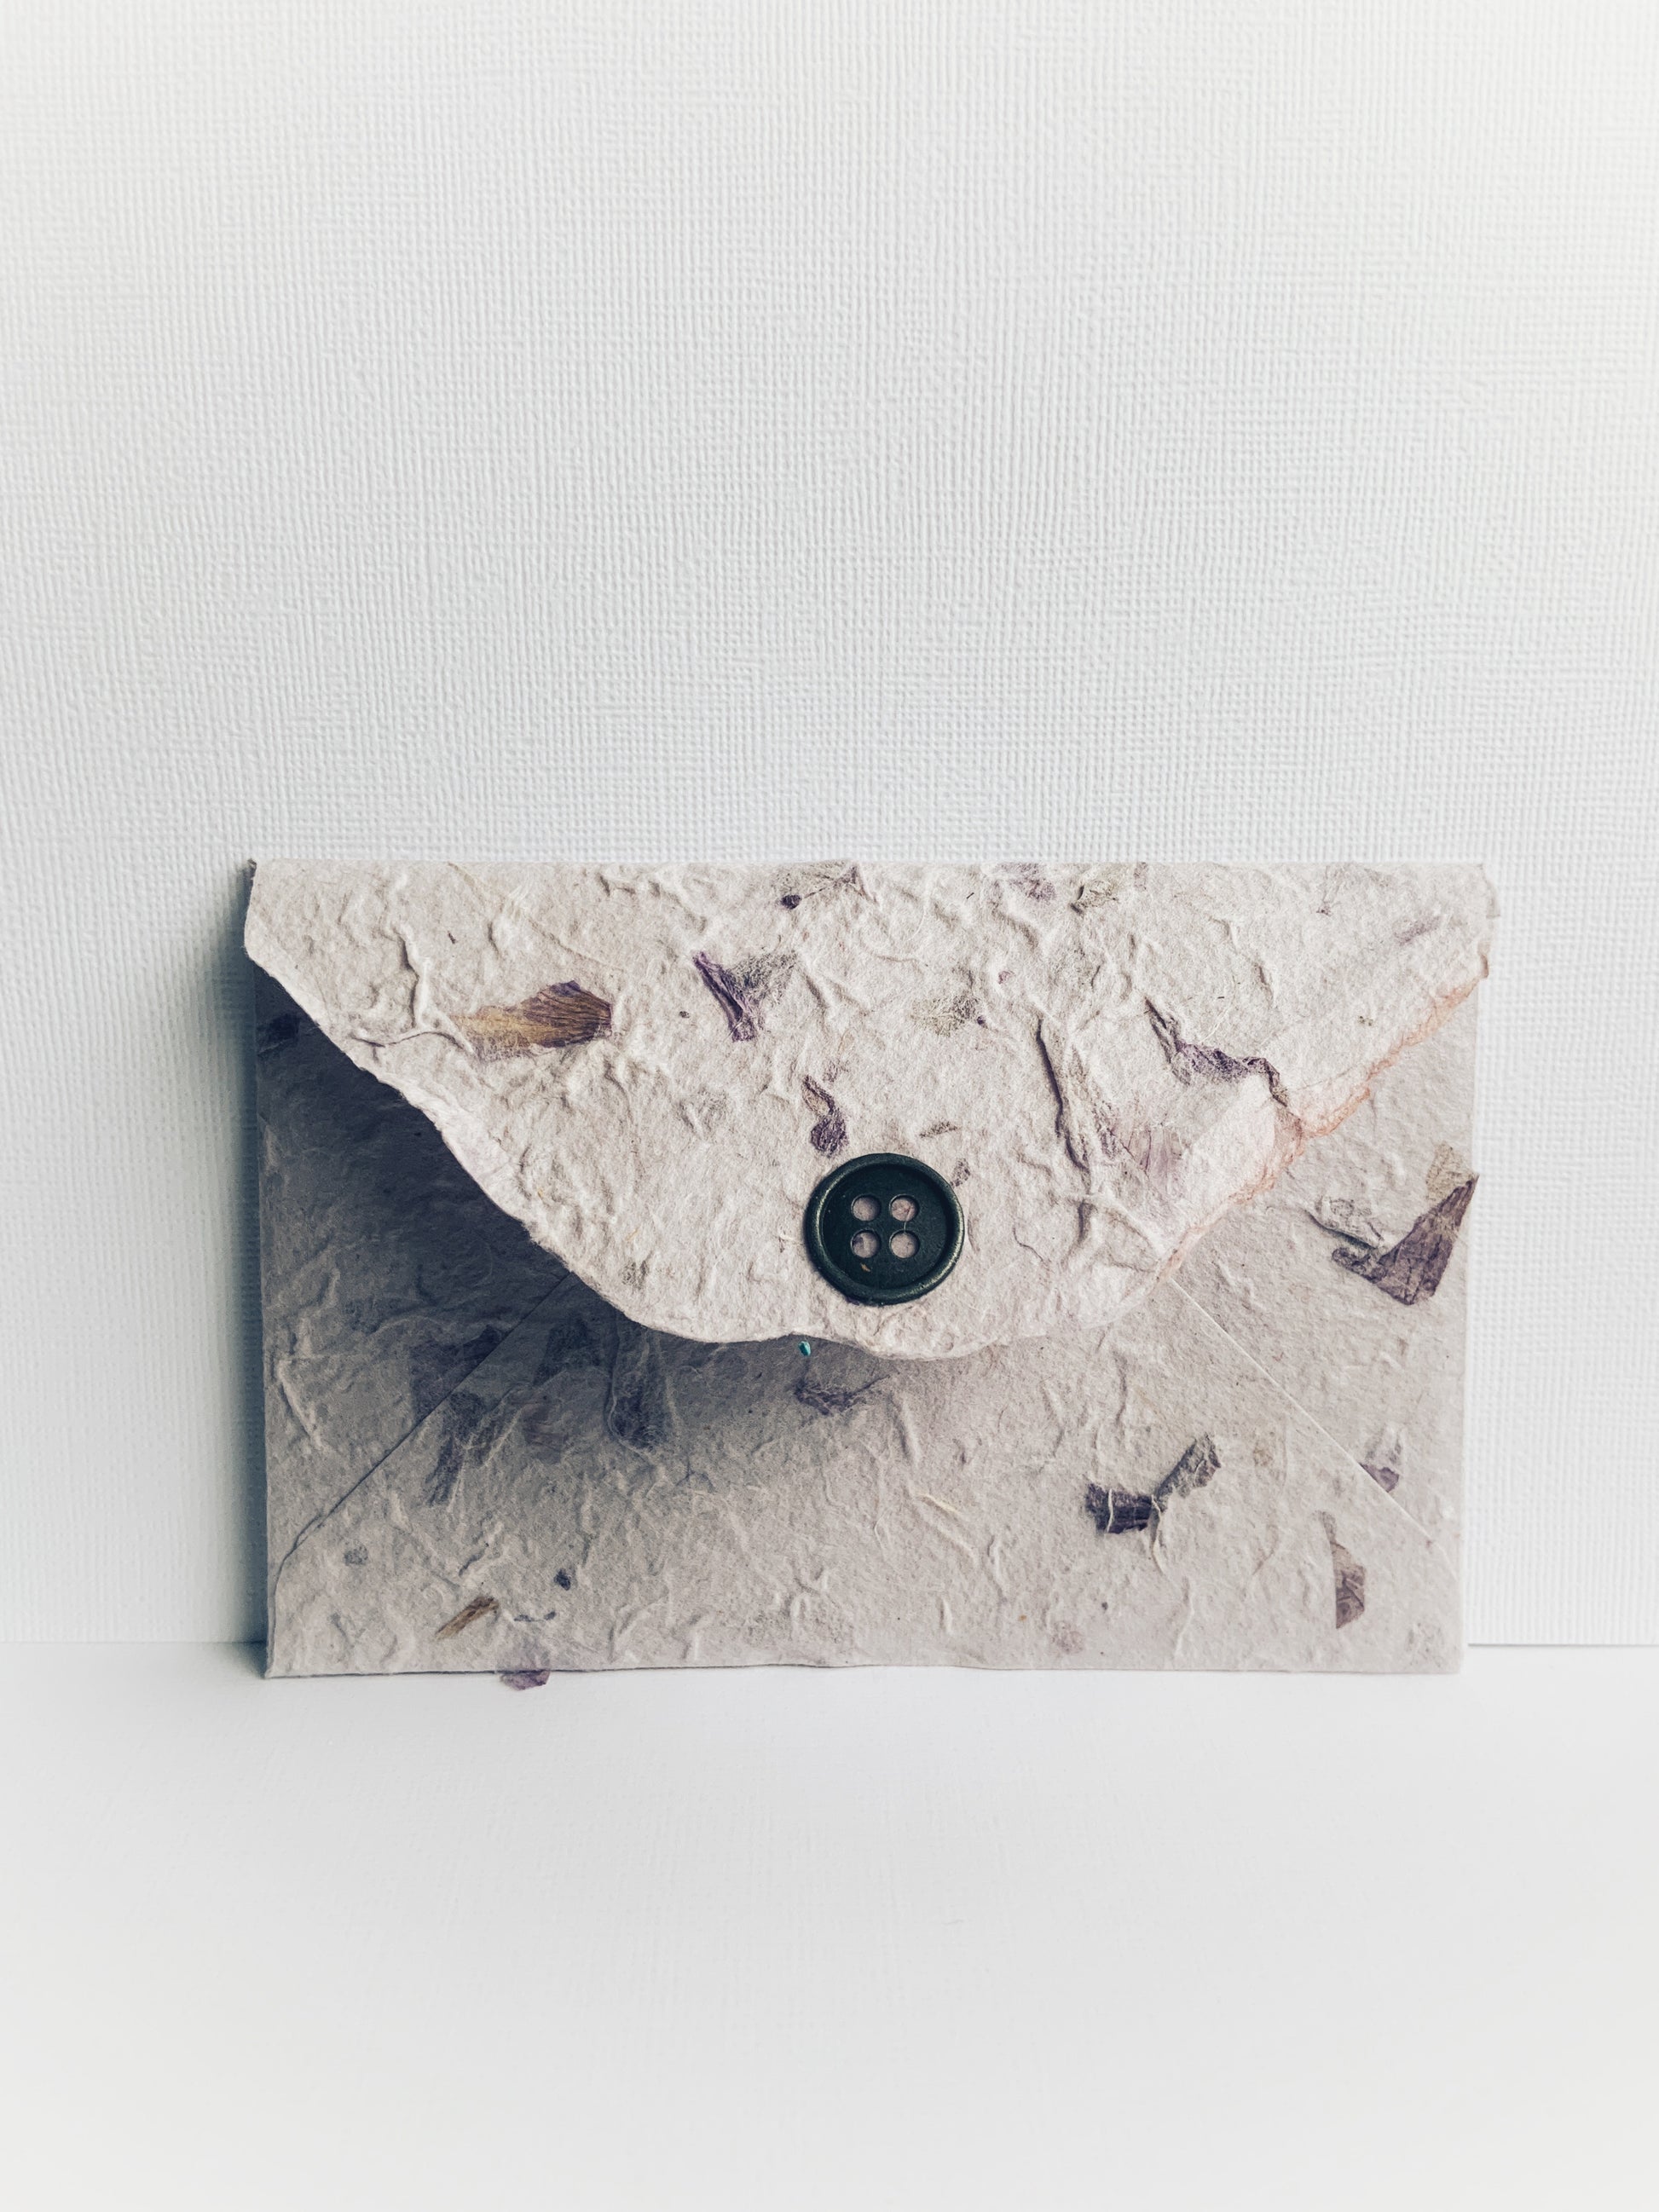 Back of a handmade envelope made from mauve handmade paper from Thailand showing detail on flap and decorative metal button. Small pieces of dried flowers add to the paper's texture.